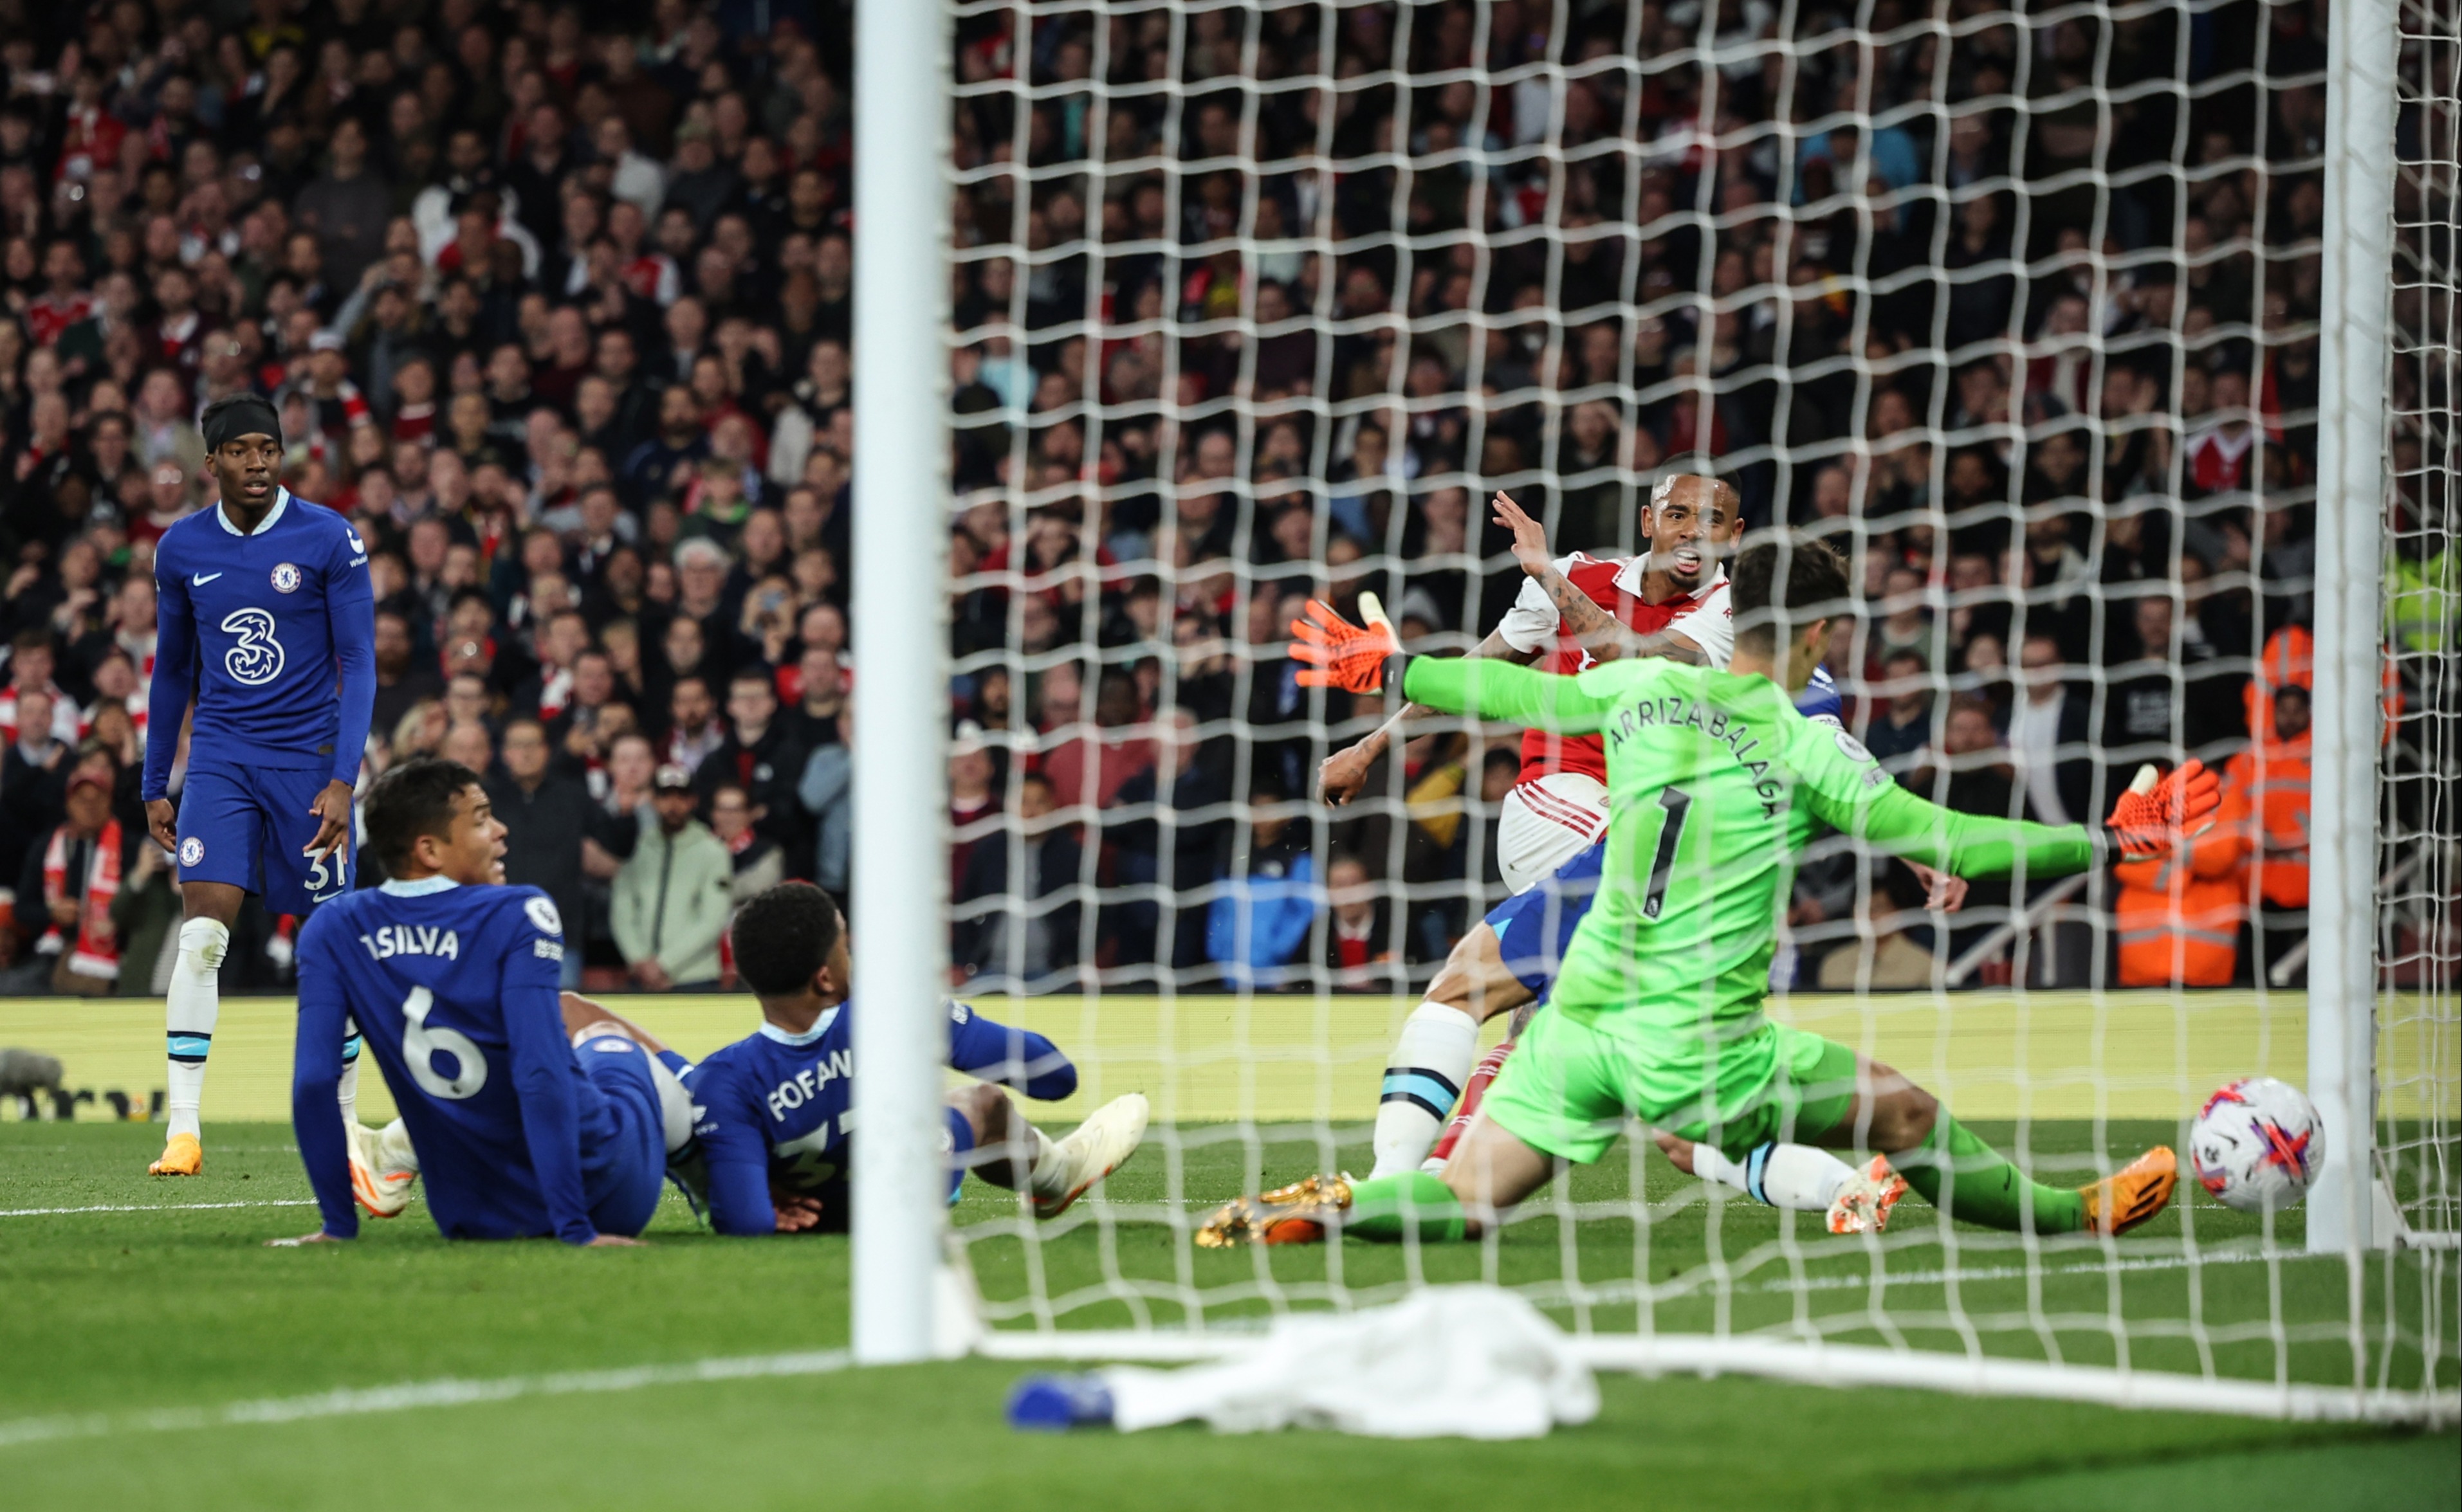 , Arsenal 3 Chelsea 1: Gunners keep Premier League title hopes alive after first-half demolition of dismal Blues